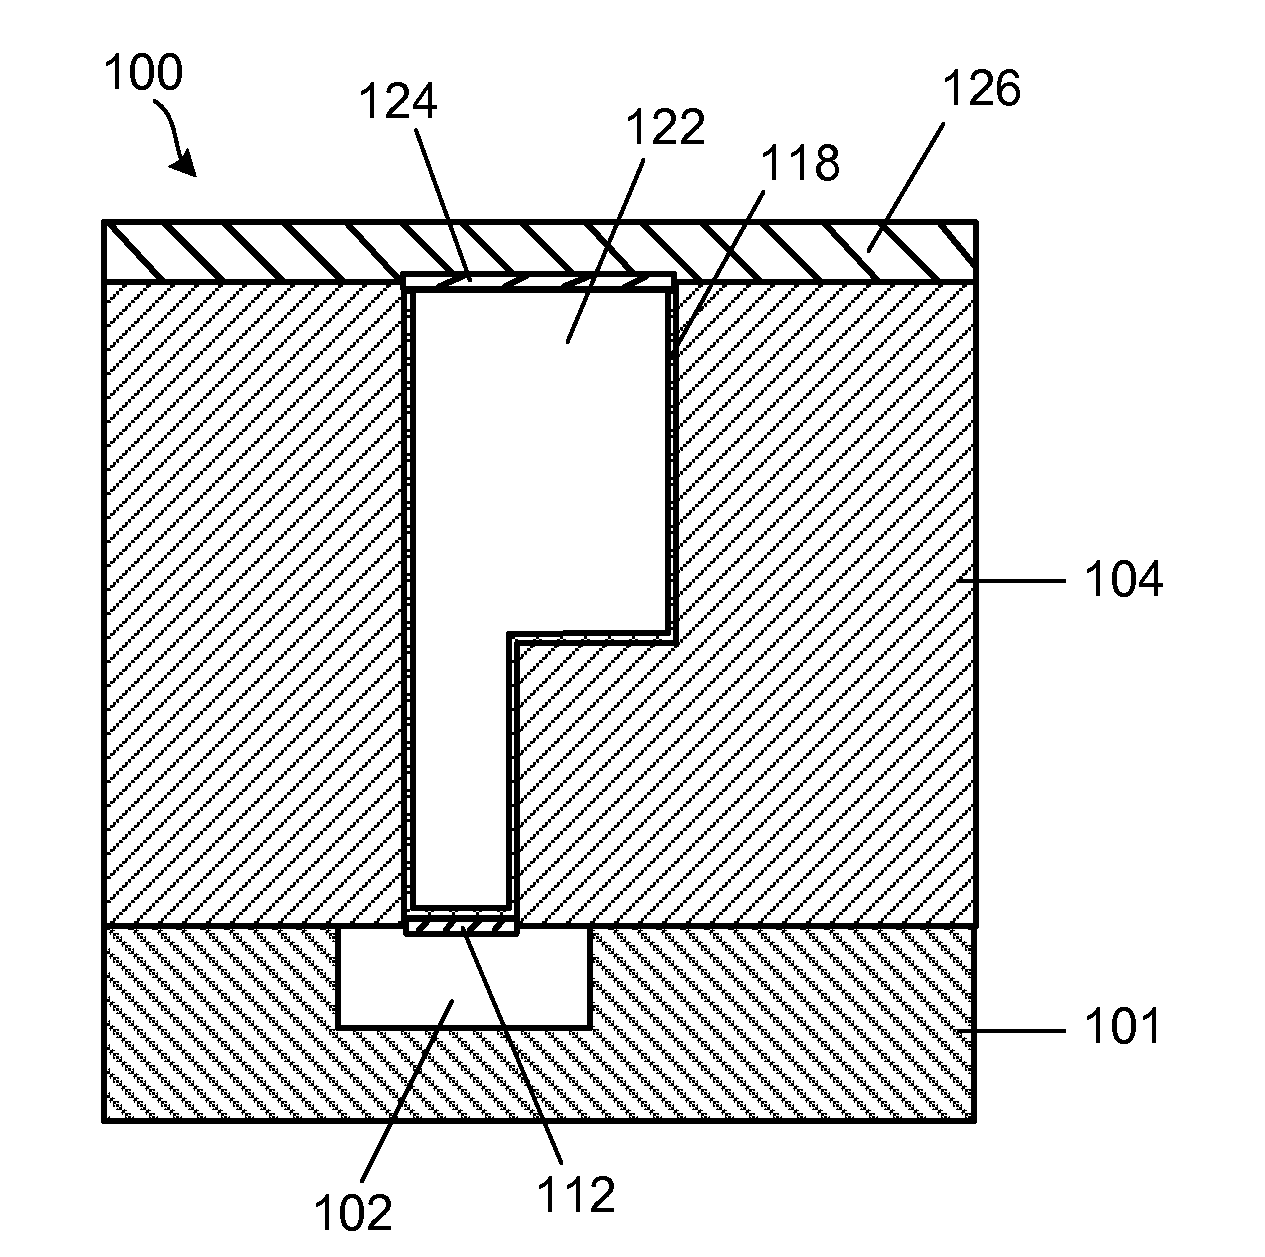 Method for forming cobalt tungsten cap layers